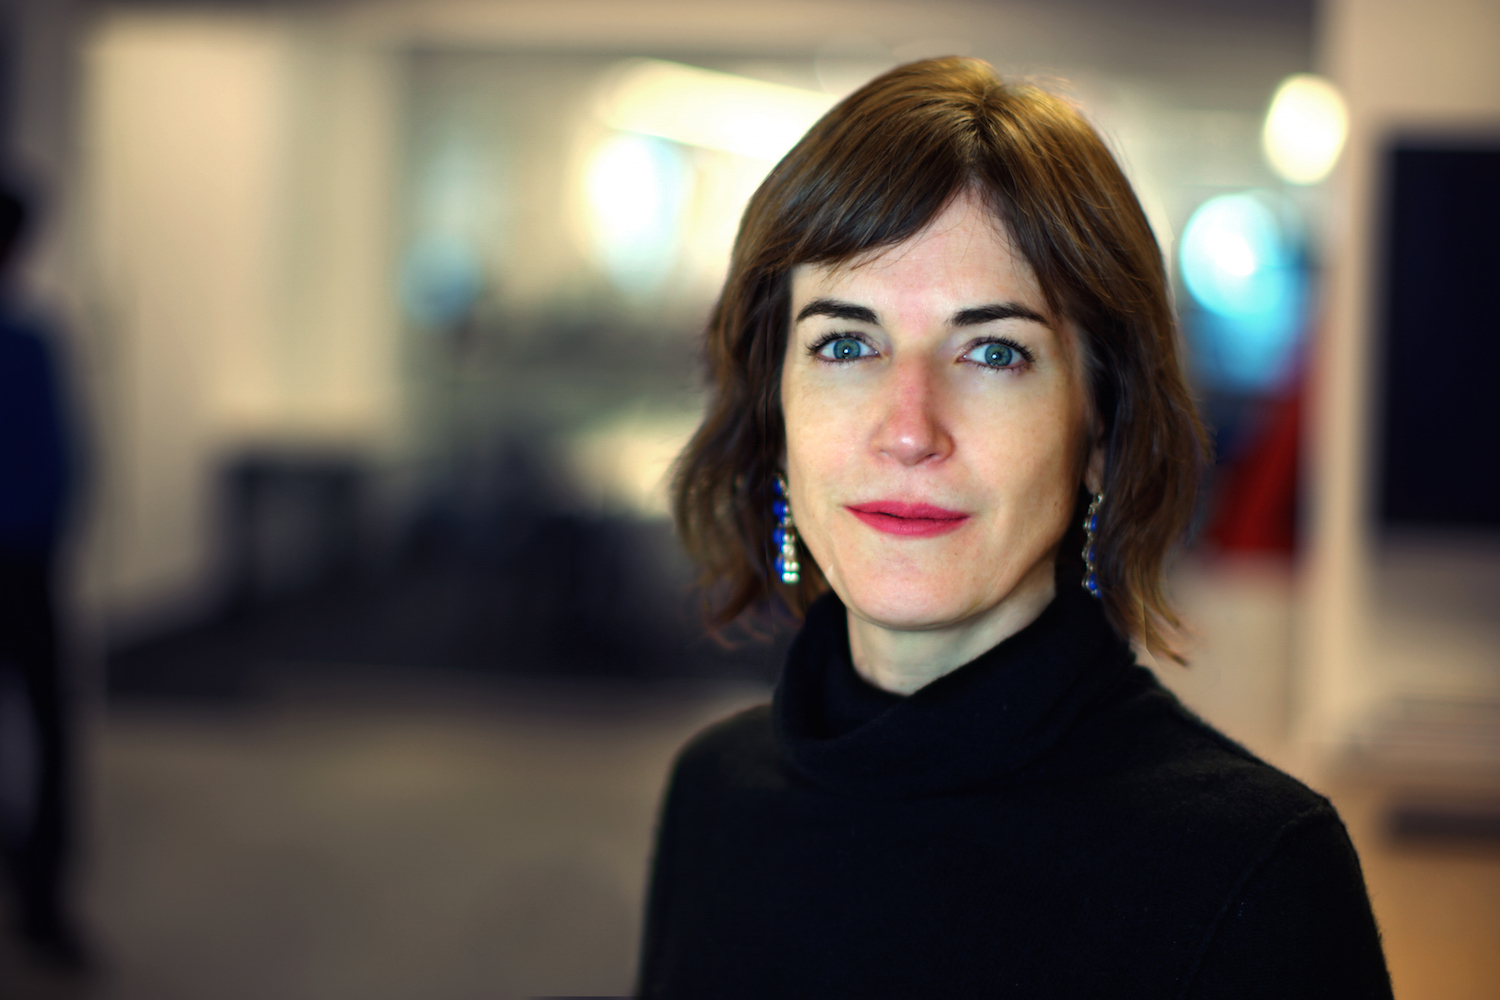 Kerry Nolan, AIA, Senior Associate, Beyer Blinder Belle Architects and Planners; AIA New York Women in Architecture Committee Co-Chair. Image courtesy of: Beyer Blinder Belle